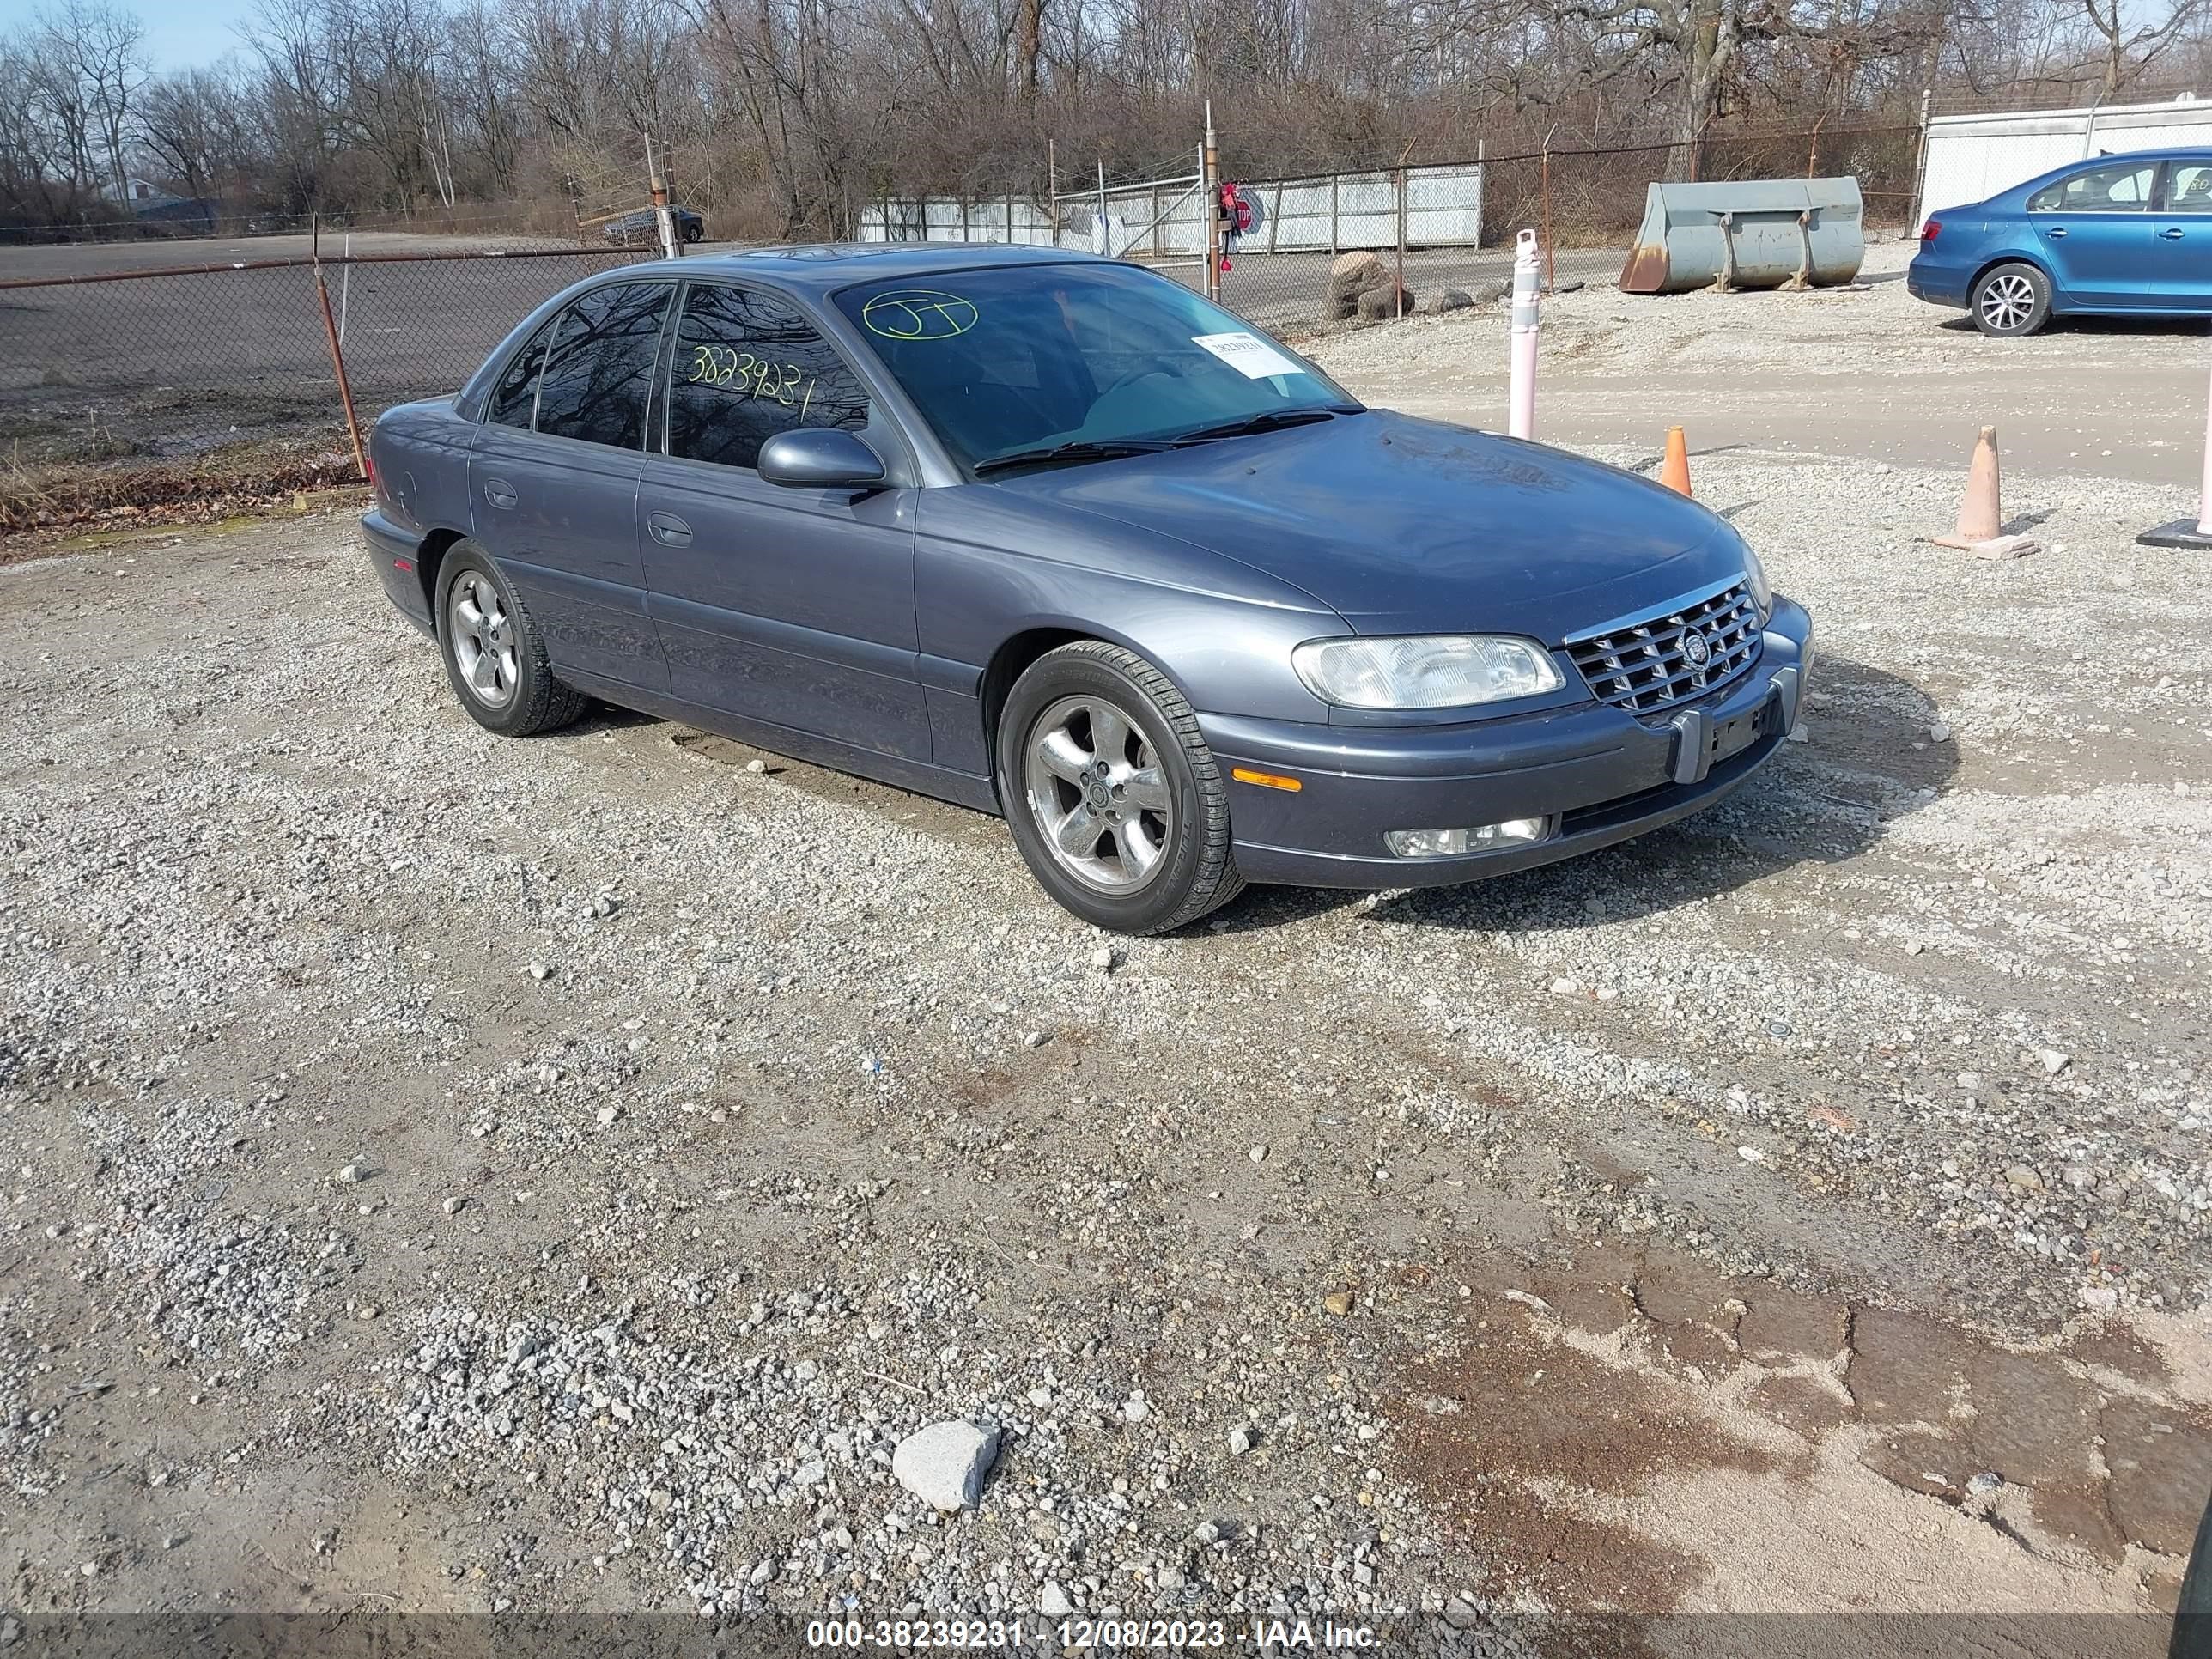 vin: W06VR54R6VR188321 W06VR54R6VR188321 1997 cadillac catera 3000 for Sale in 45417, 400 Cherokee Dr, Dayton, USA